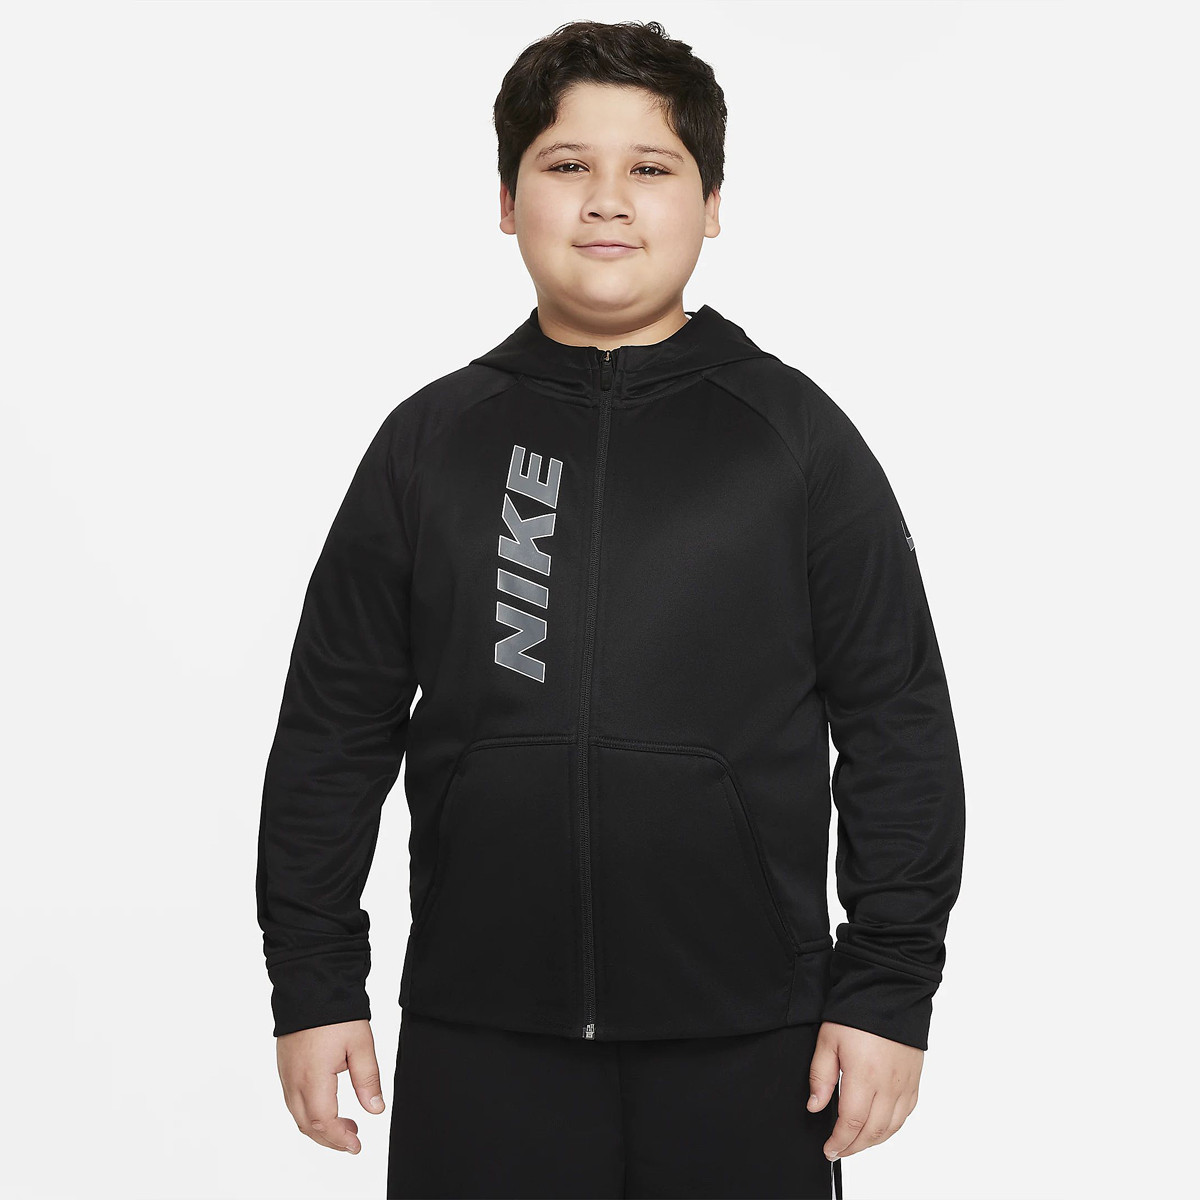 NIKE JUNIOR BOY THERMA-FIT JACKET- EXTENDED SIZE